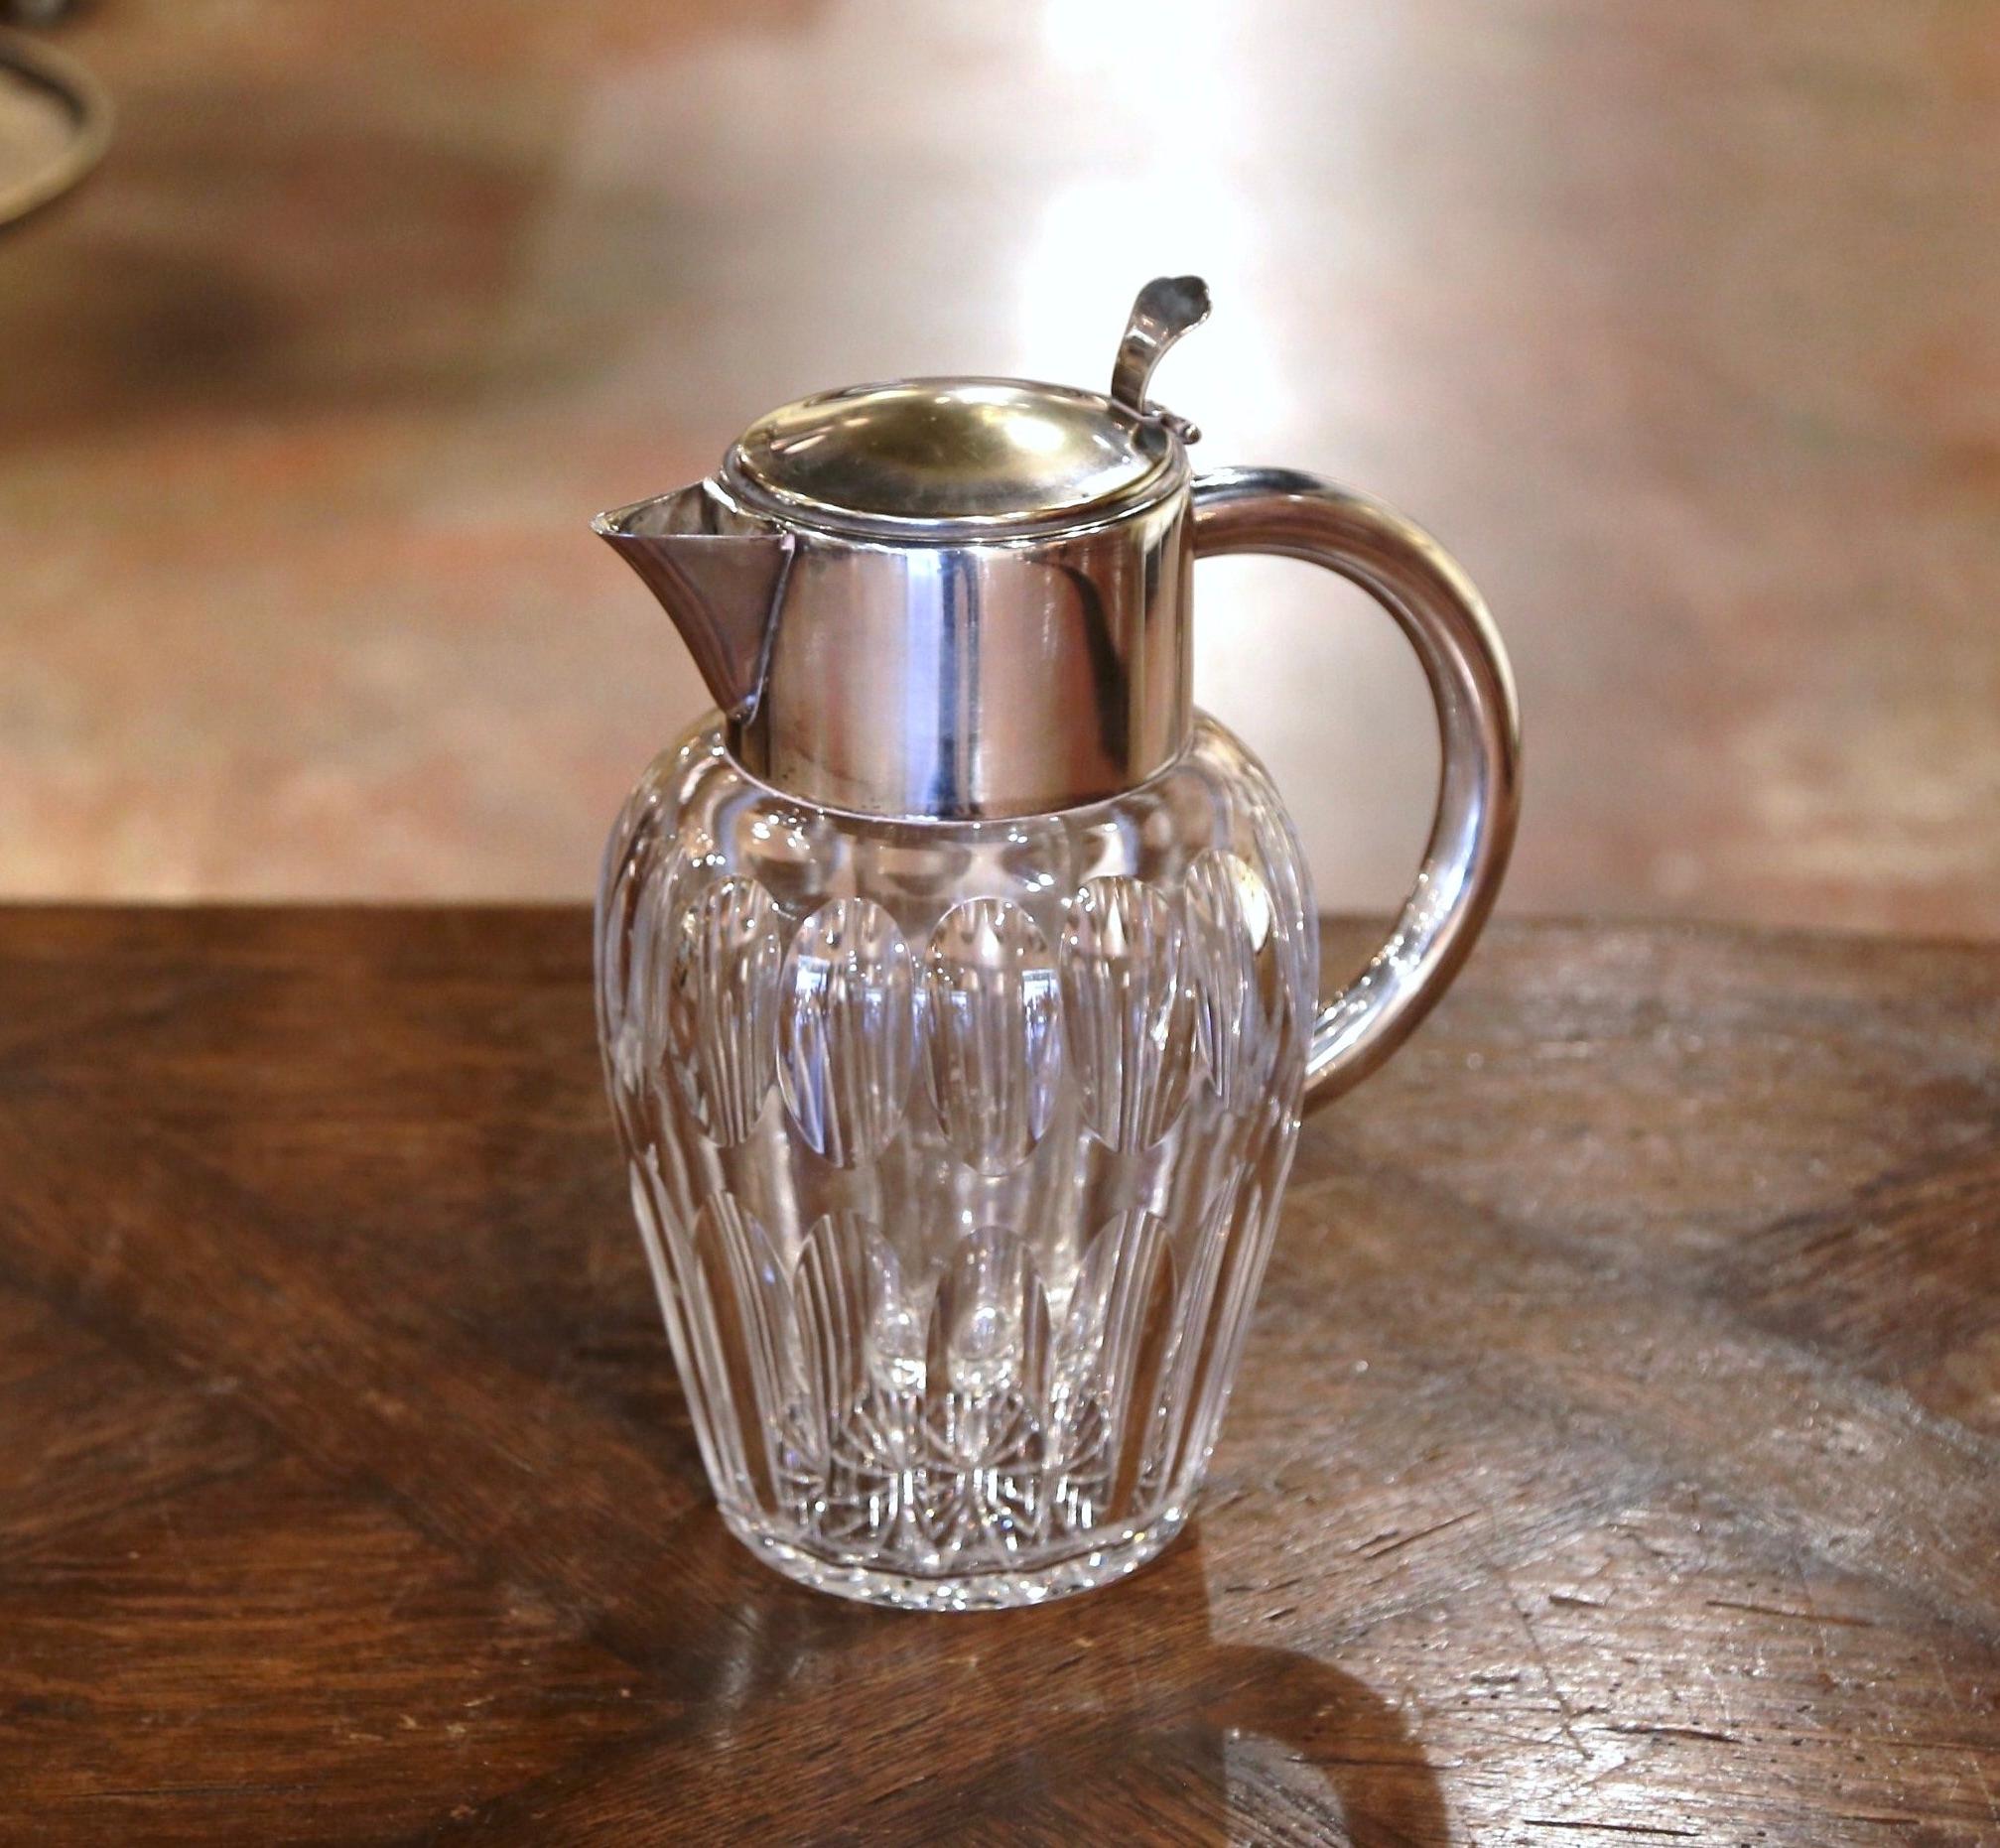 Crafted in France circa 1950, the large pitcher features a round cut glass body and dressed with a silvered brass neck, top and handle. Lifting up the top and removing the CAP, there is an insert ice container in order to keep drinks fresh and cold.